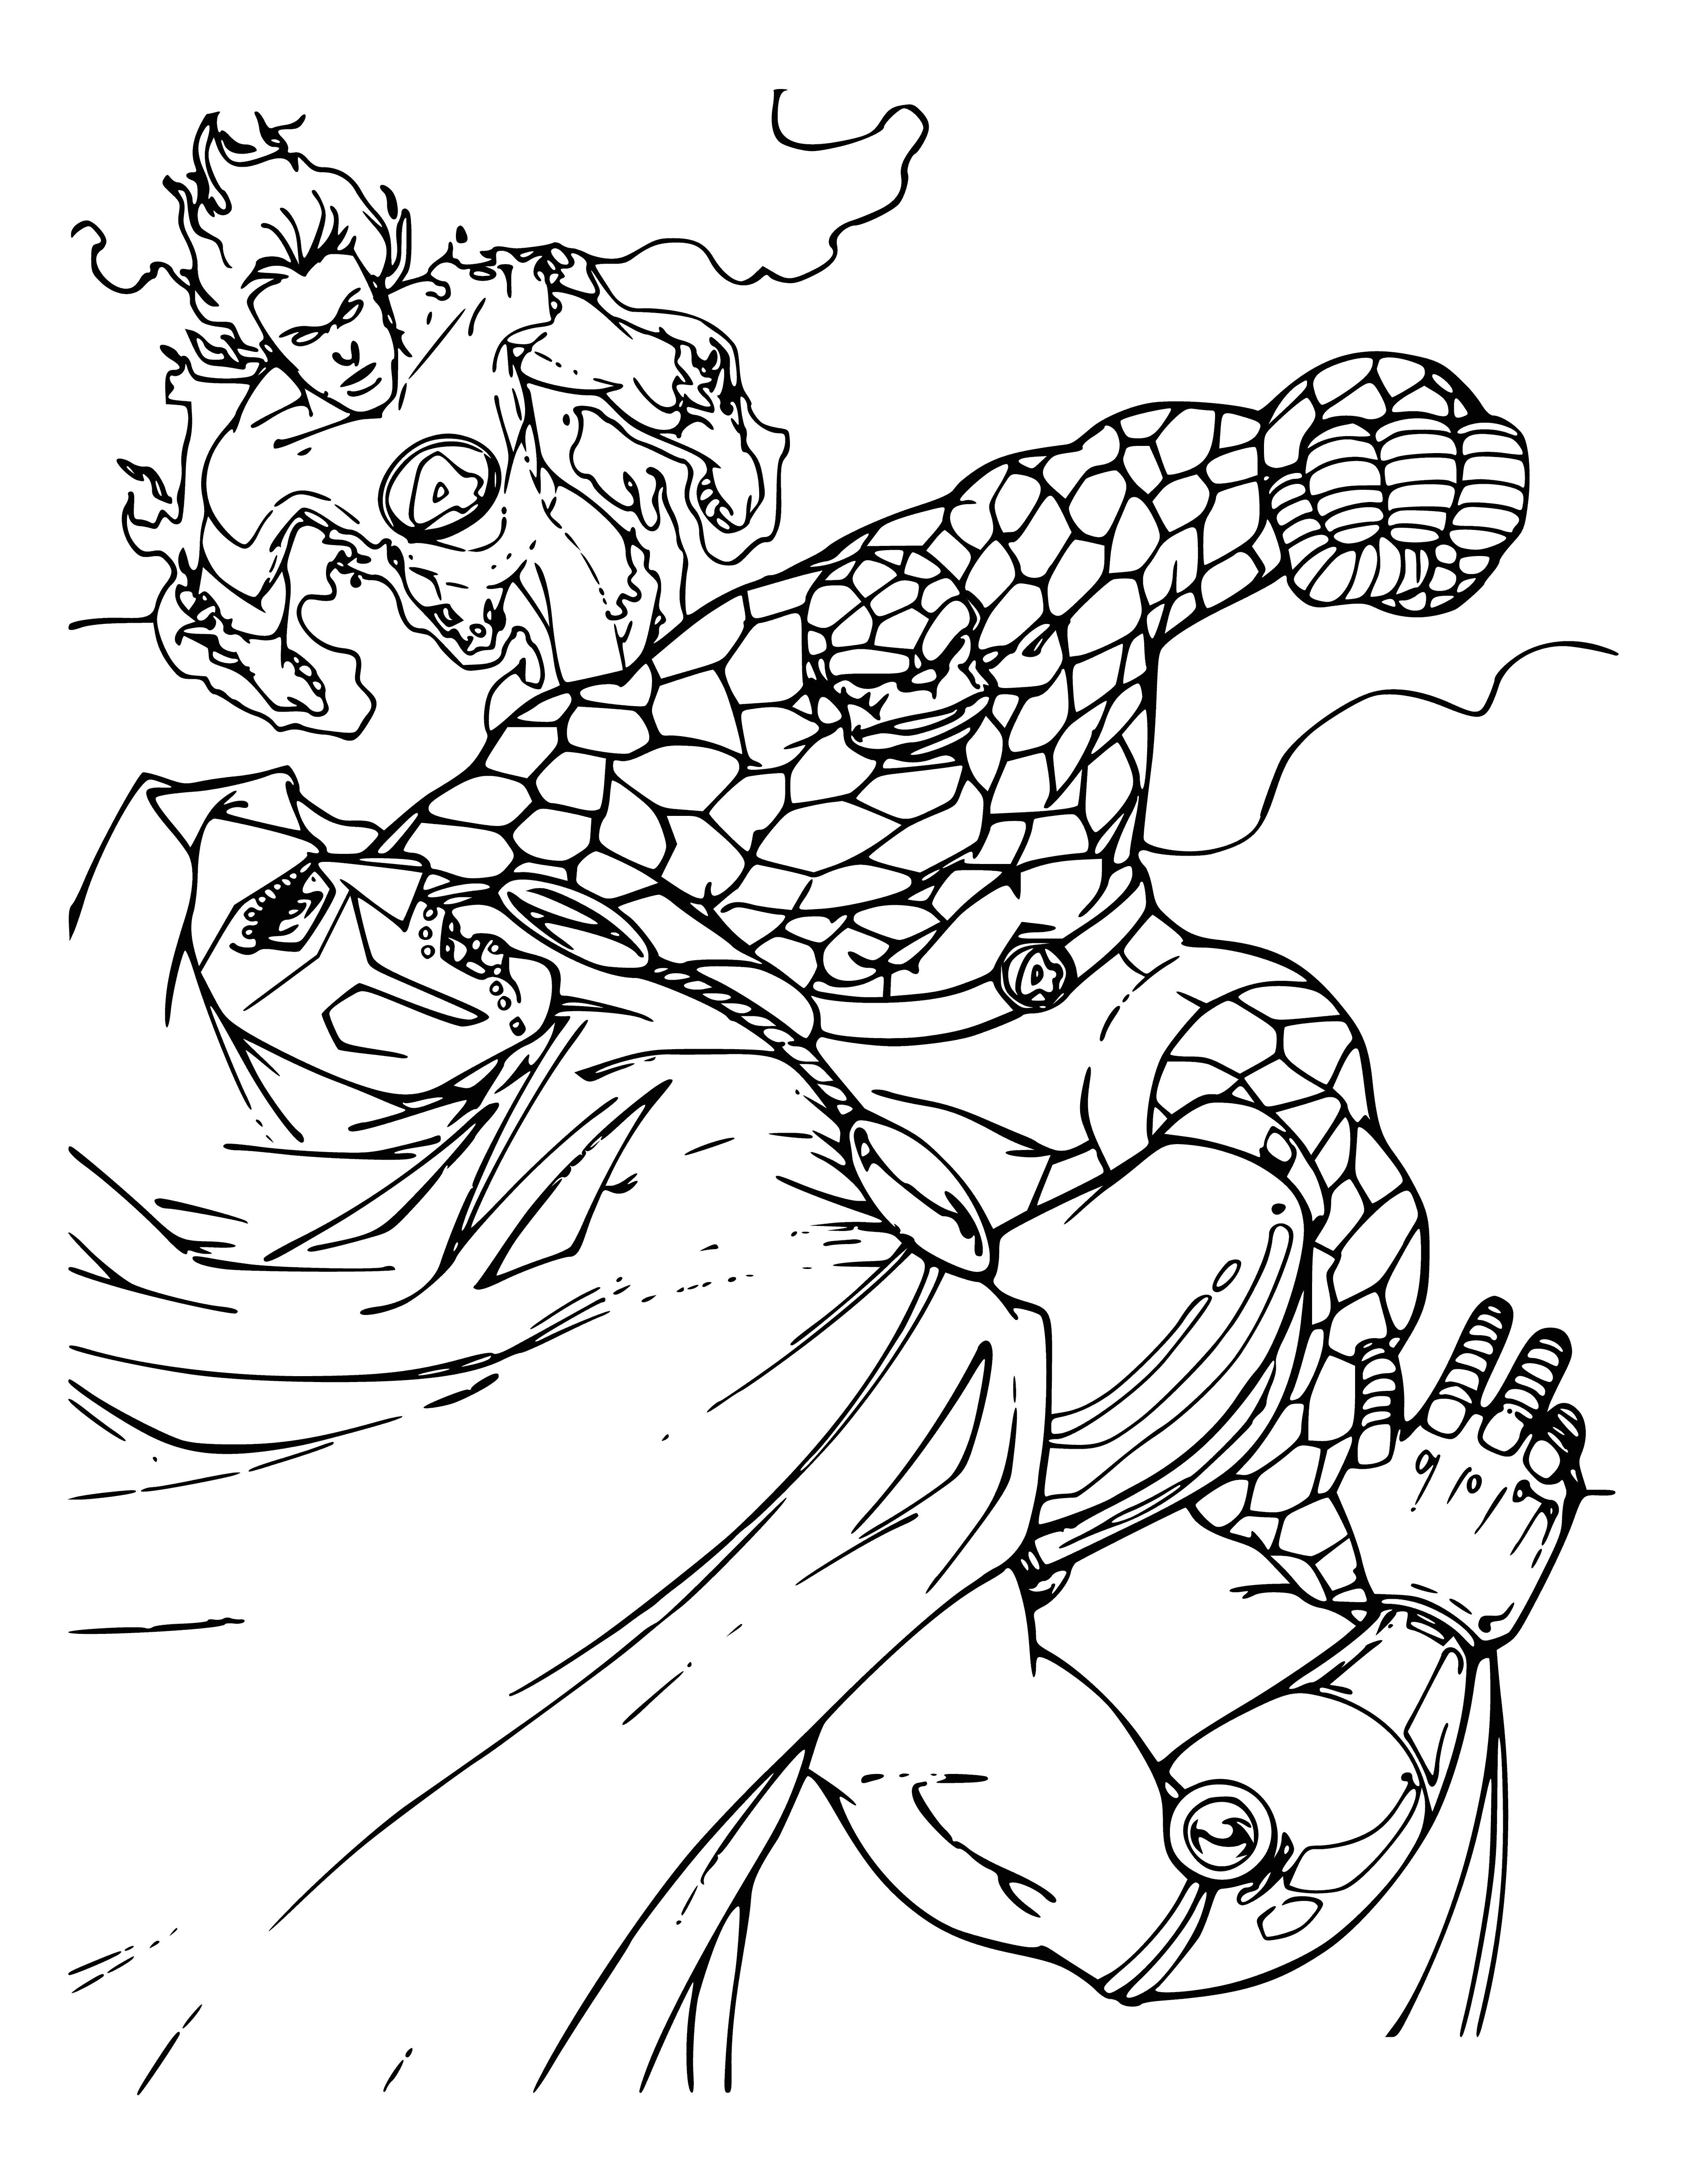 coloring page: The Fantastic Four use their powers in tandem to defeat an unknown enemy. Mr. Fantastic ties, Invisible Woman creates a force field, Human Torch attacks with fire, and Thing uses strength.